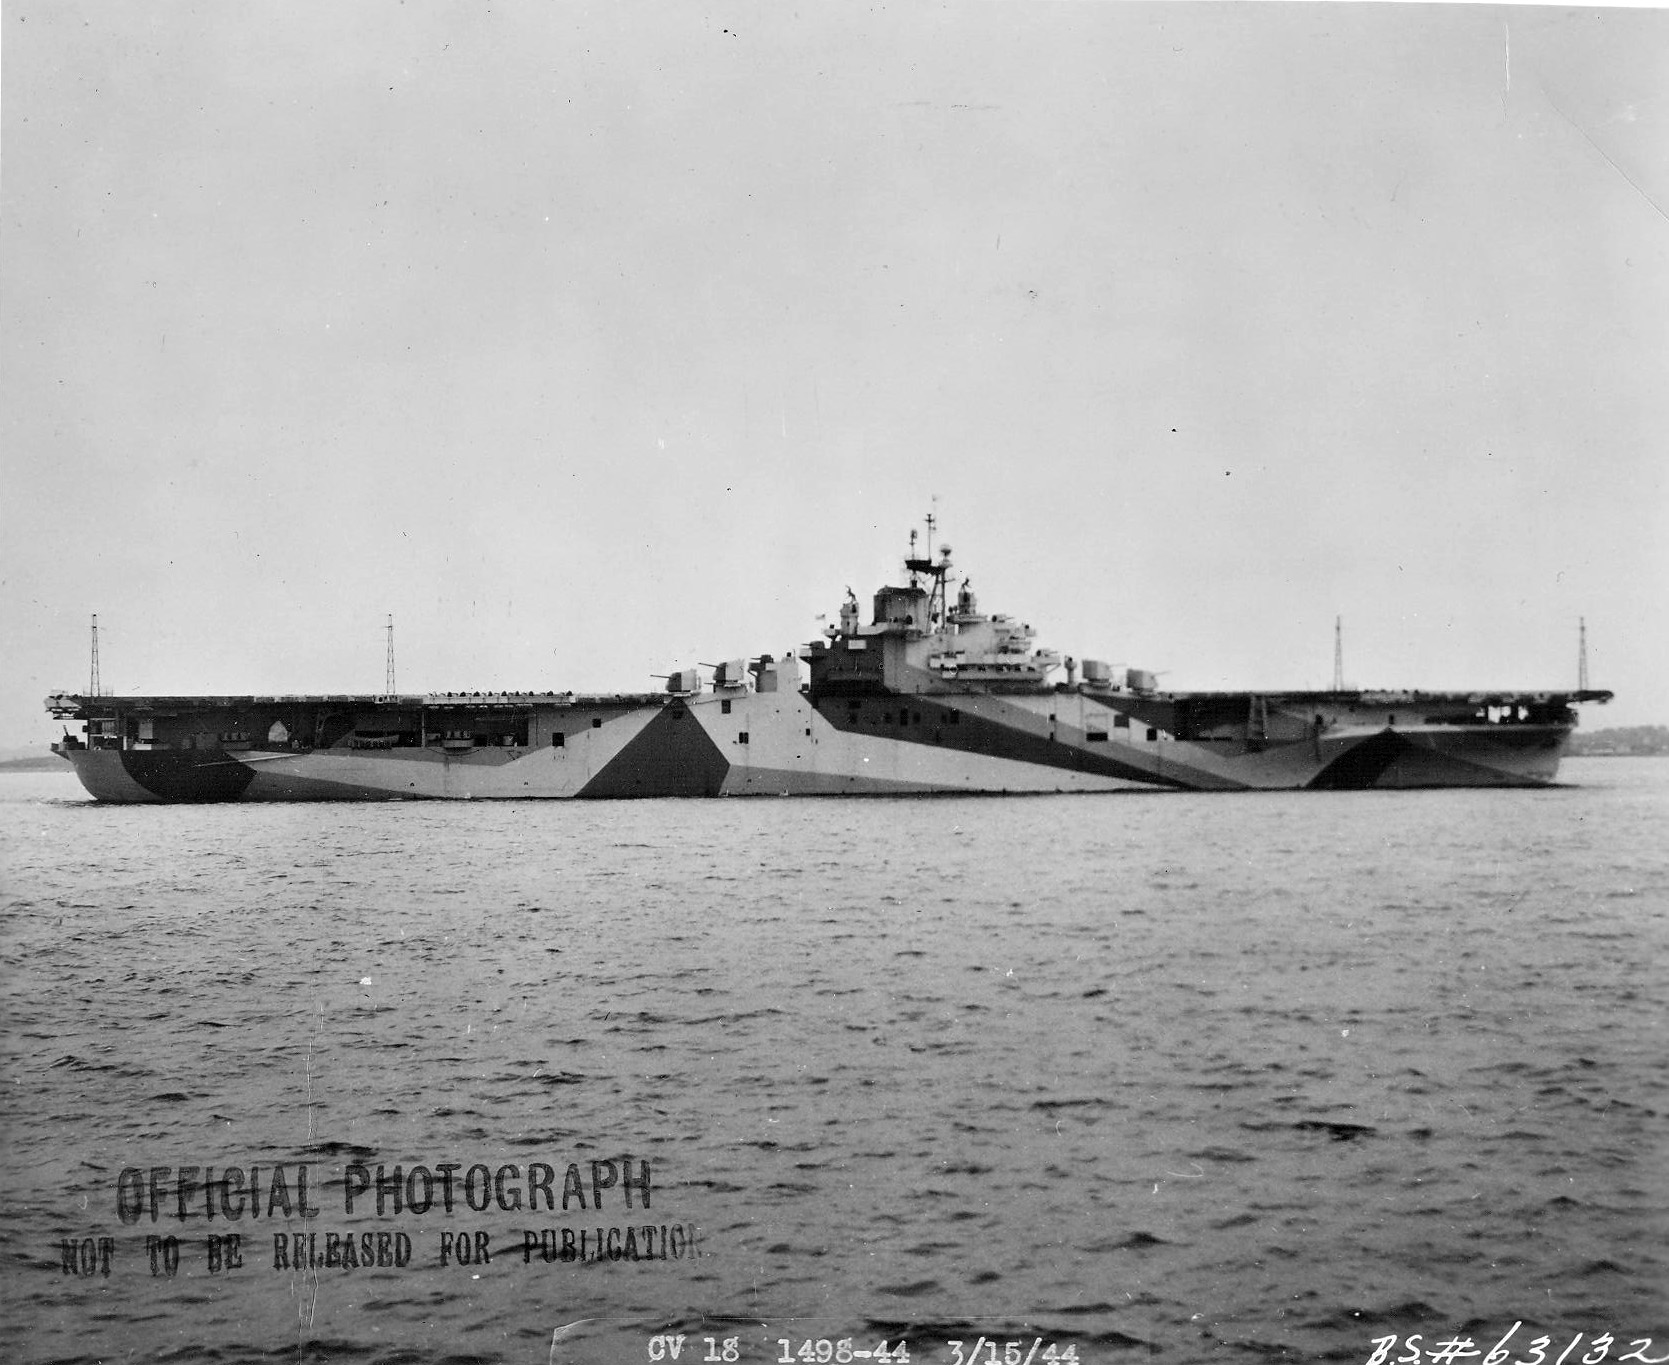 USS Wasp (Essex-class) after her shakedown cruise preparing to leave Boston, Massachusetts, United States, for the Panama Canal, 15 Mar 1944. Note Measure 33/10A camouflage. Photo 1 of 4